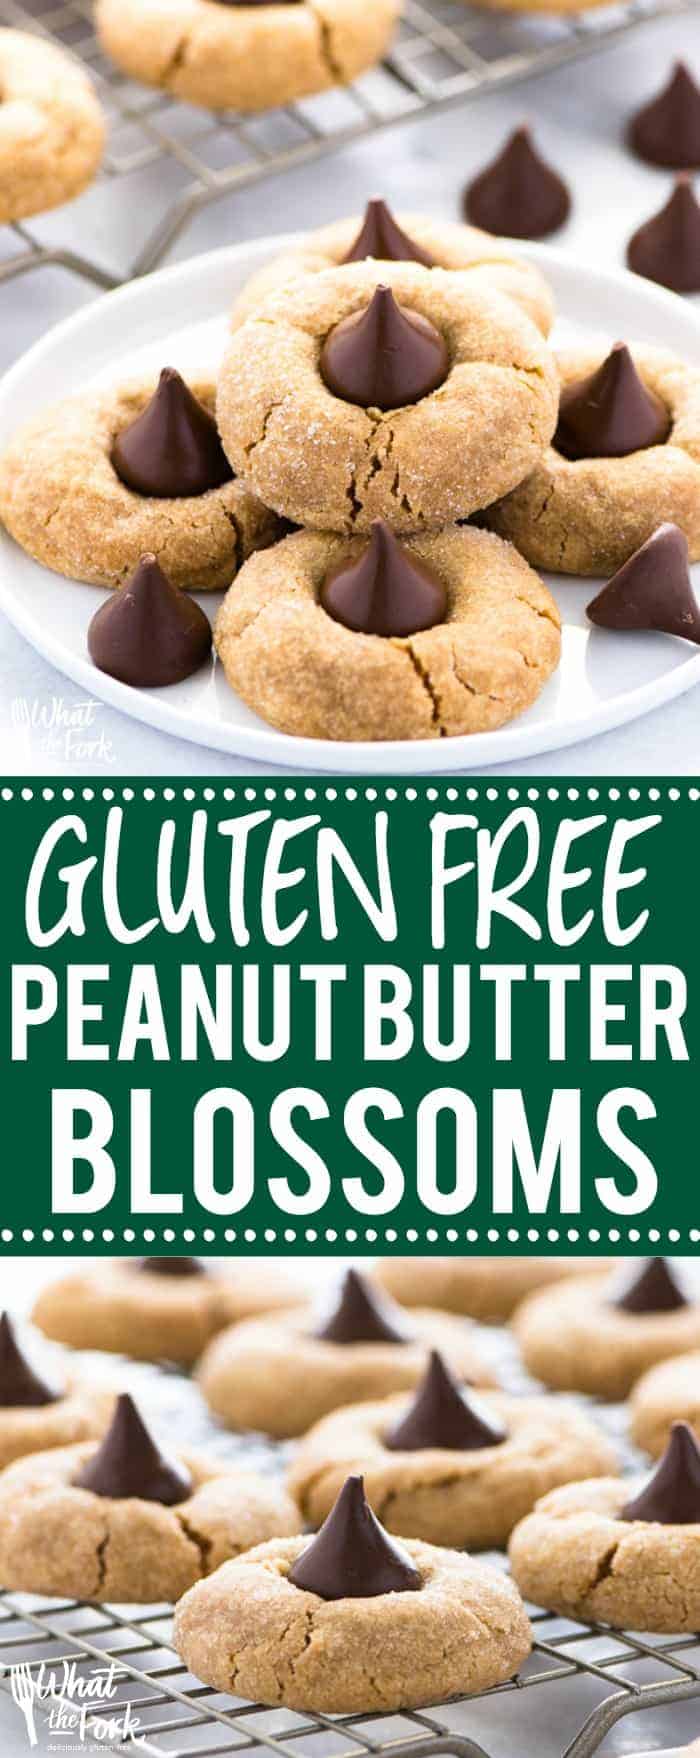 These gluten free peanut butter blossoms are a staple dessert during the Christmas season and are everyone’s favorite cookie! They’re easy to make and perfect for gifting! Recipe from @whattheforkblog | whattheforkfoodblog.com | gluten free cookie recipes | homemade food gifts | peanut butter cookies | easy gluten free dessert recipes | homemade cookies | #peanutbutter #chocolate #baking #cookierecipes #christmascookies #glutenfree #glutenfreecookies #glutenfreebaking #glutenfreerecipes